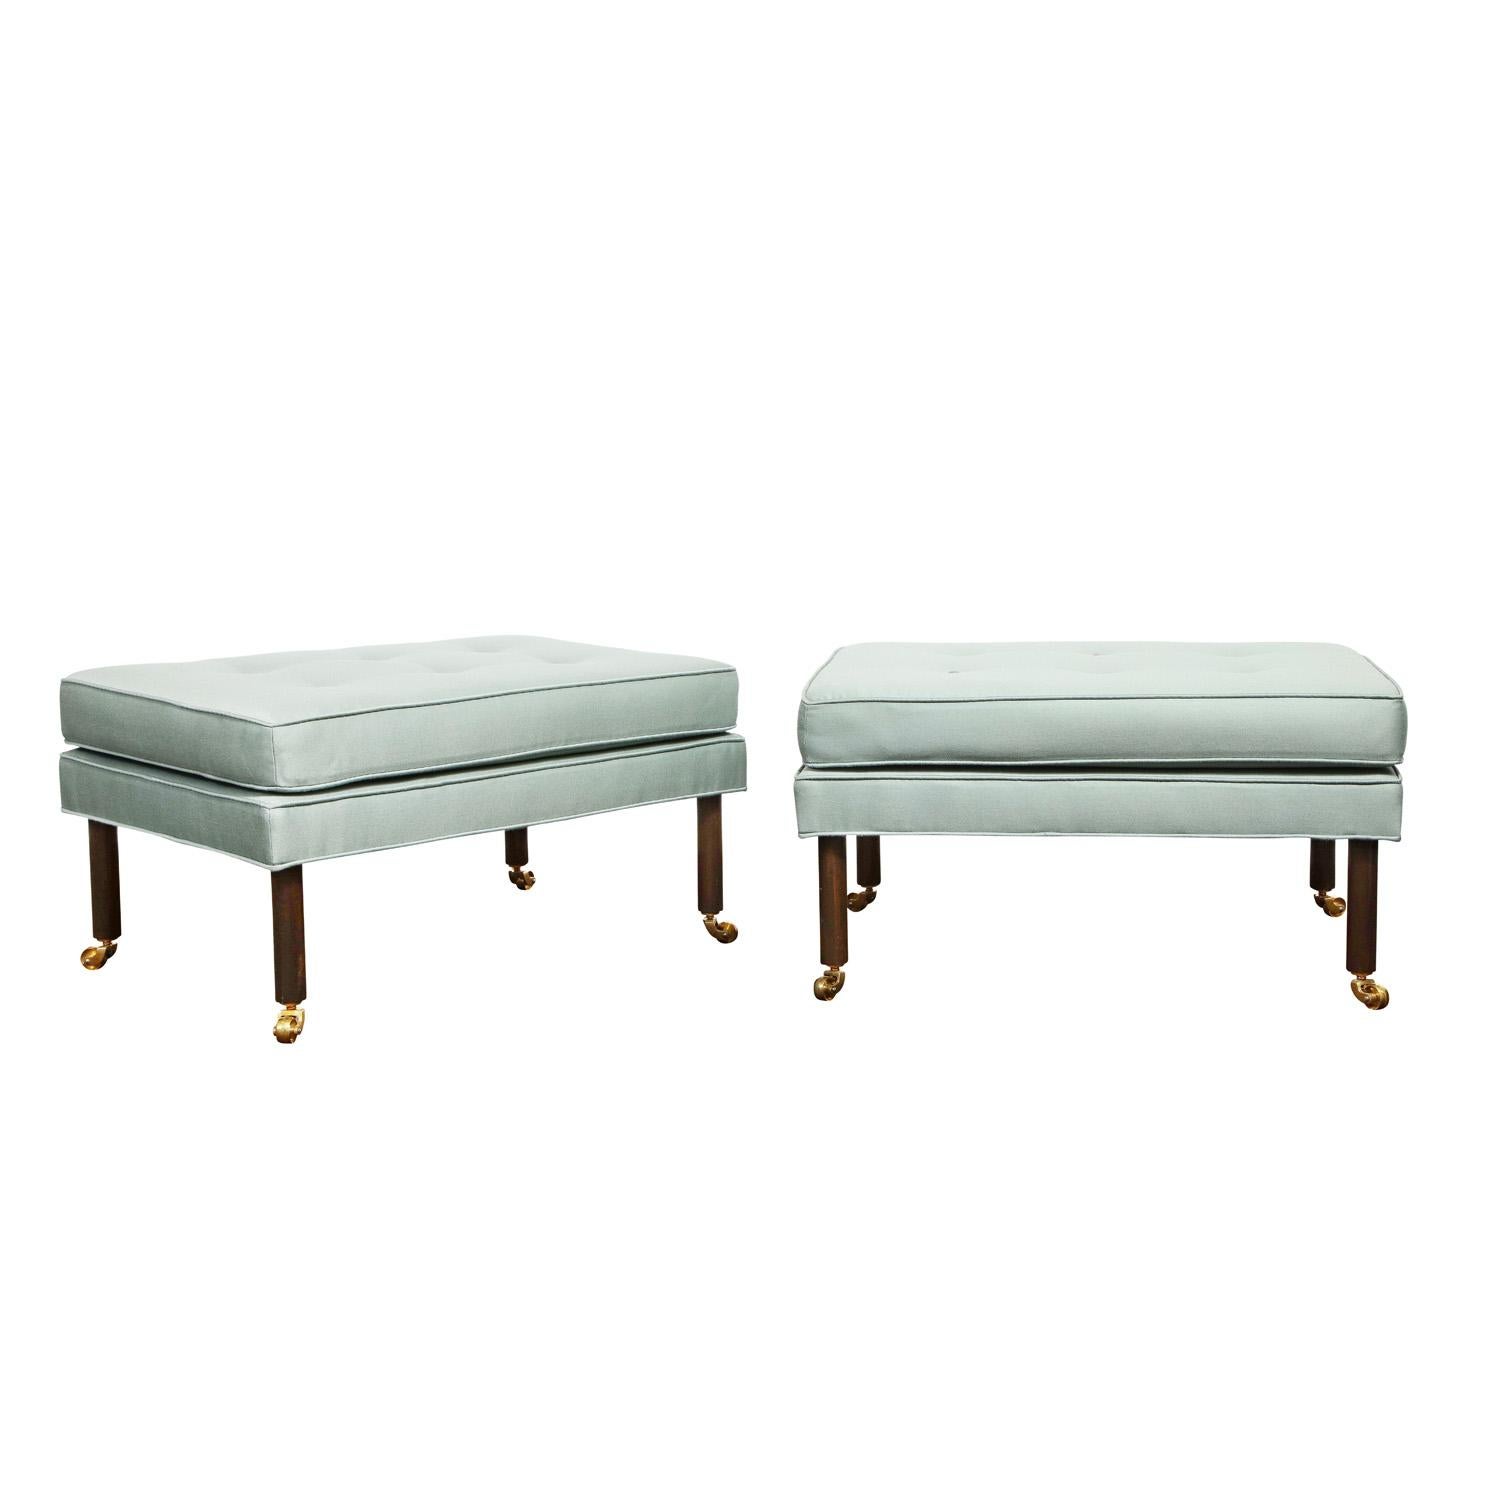 Chic pair of rectangular upholstered benches with round mahogany legs and brass castors by Harvey Probber, American 1950's. Refinished and reupholstered by Lobel Modern.